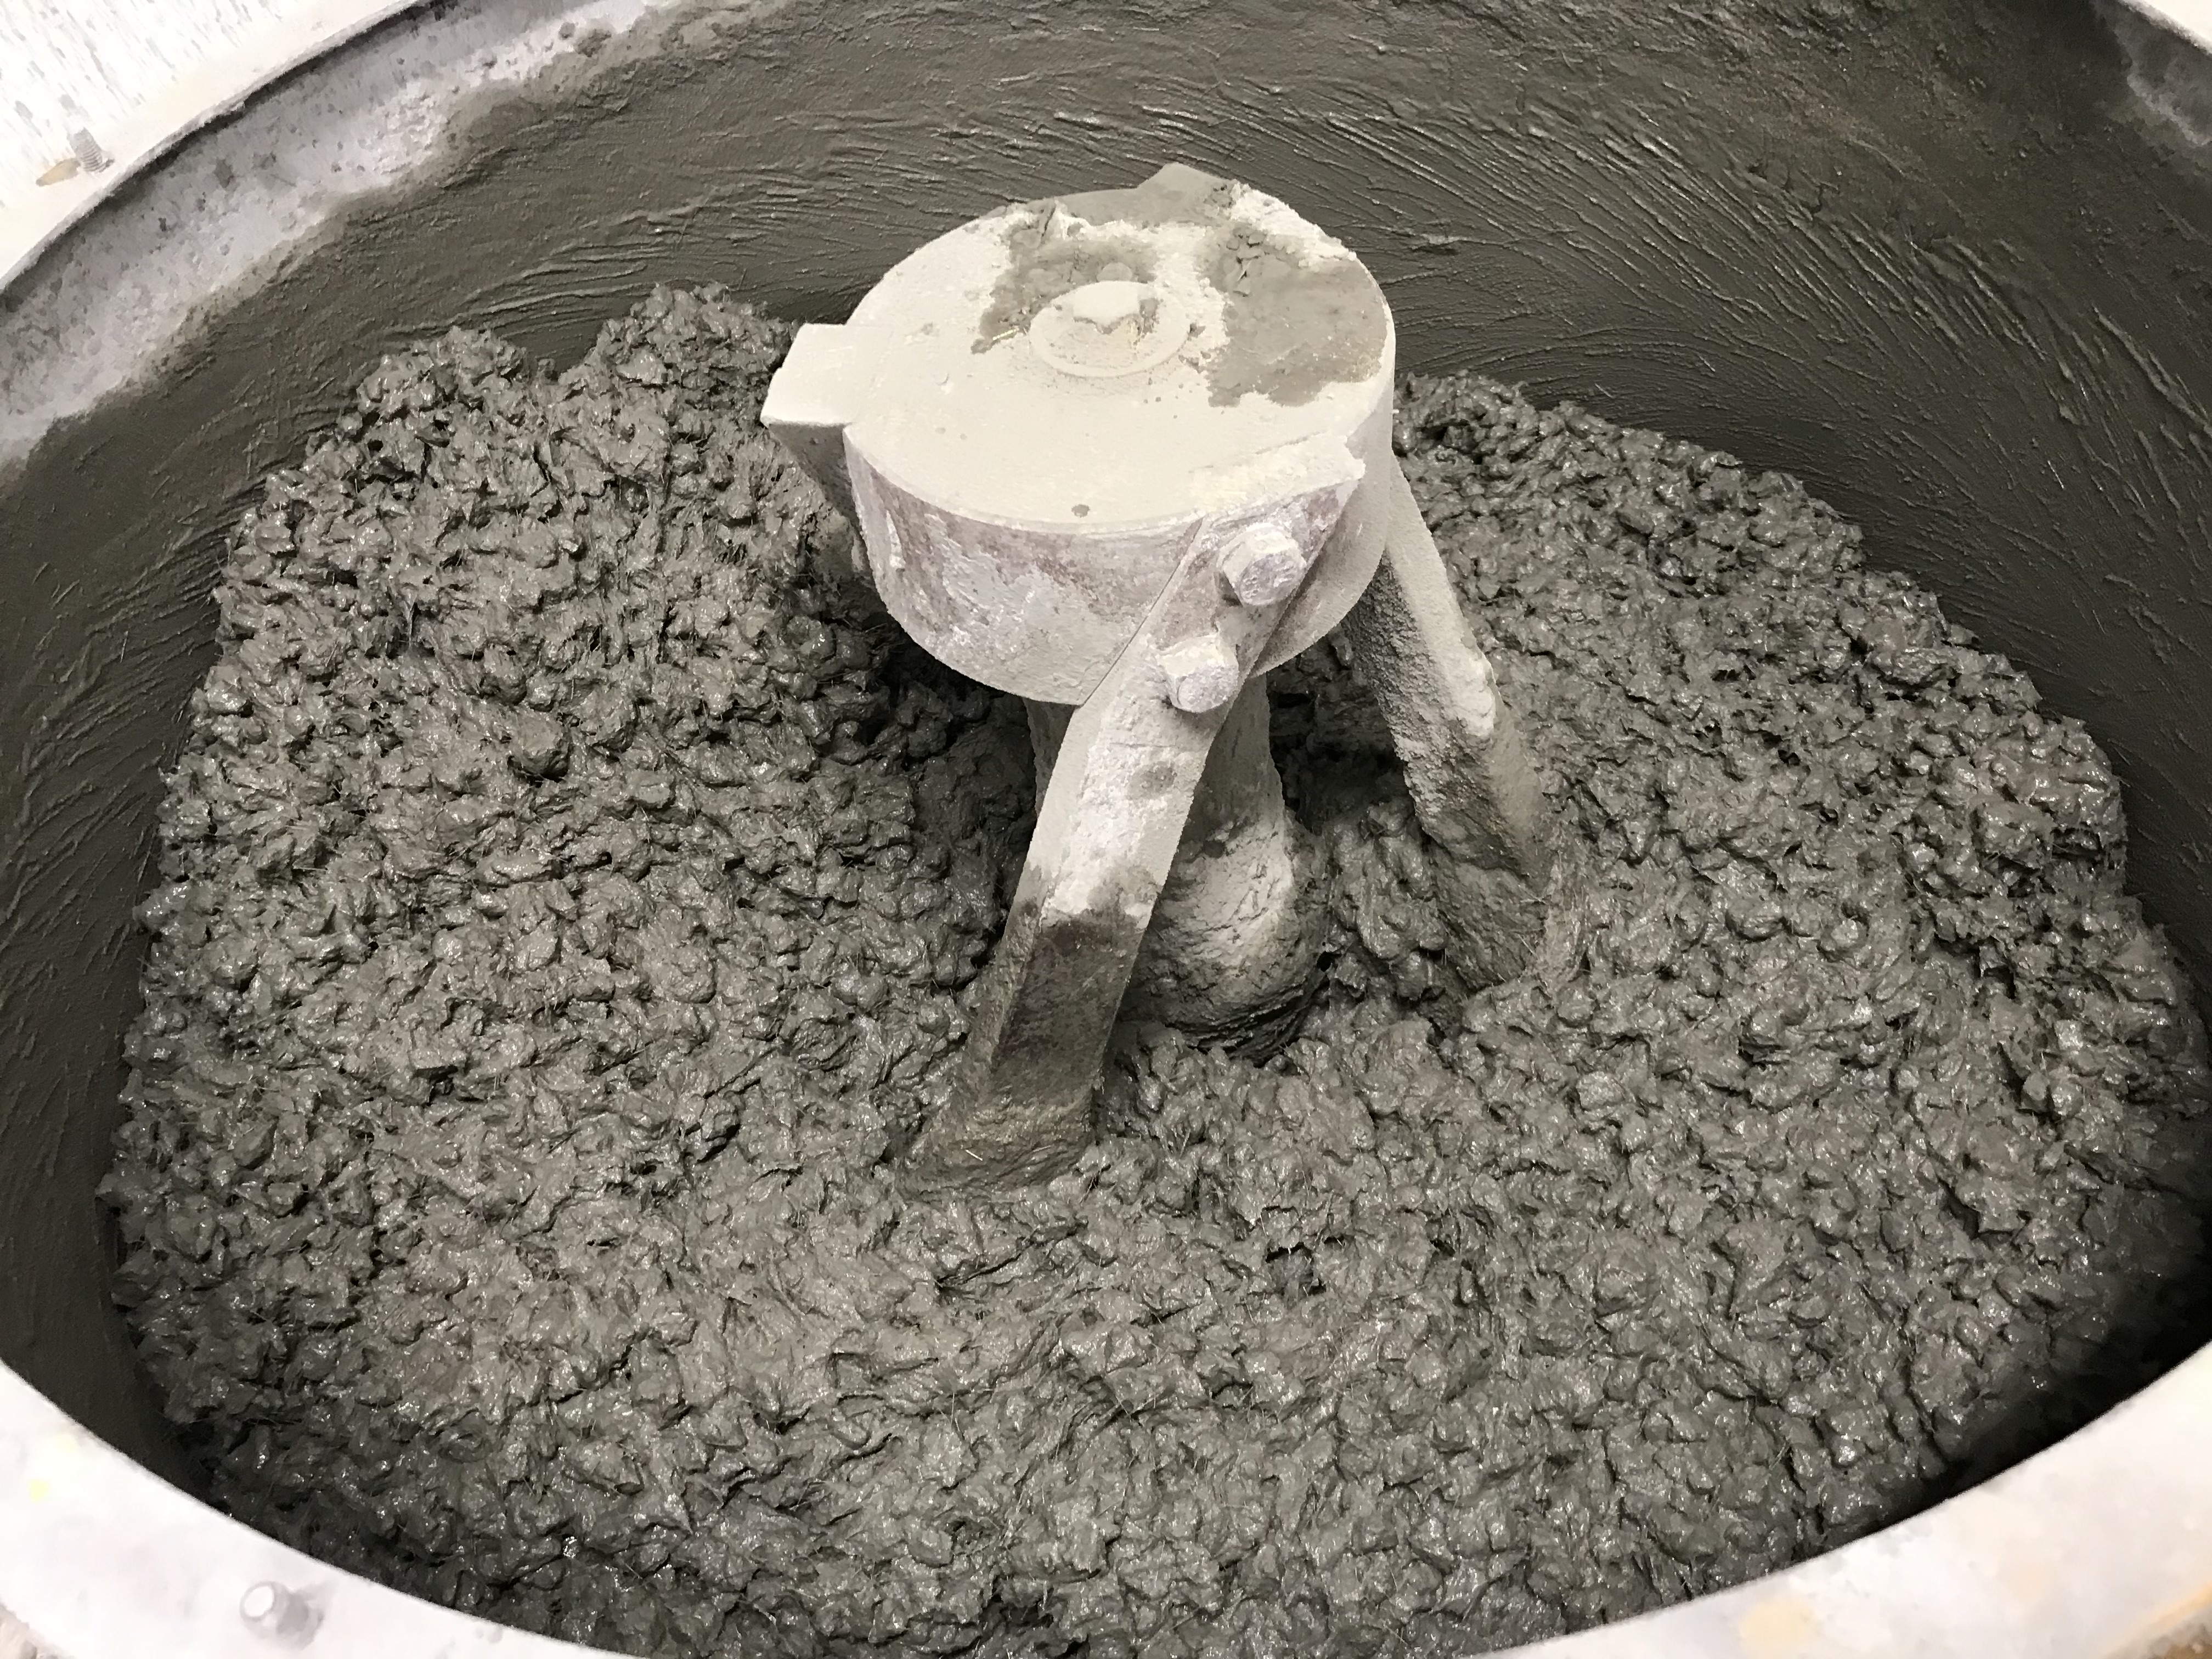 Concrete mixing using recycled tyre rubber particles for the complete replacement of traditional coarse aggregates. Credit: Mohammad Islam, RMIT